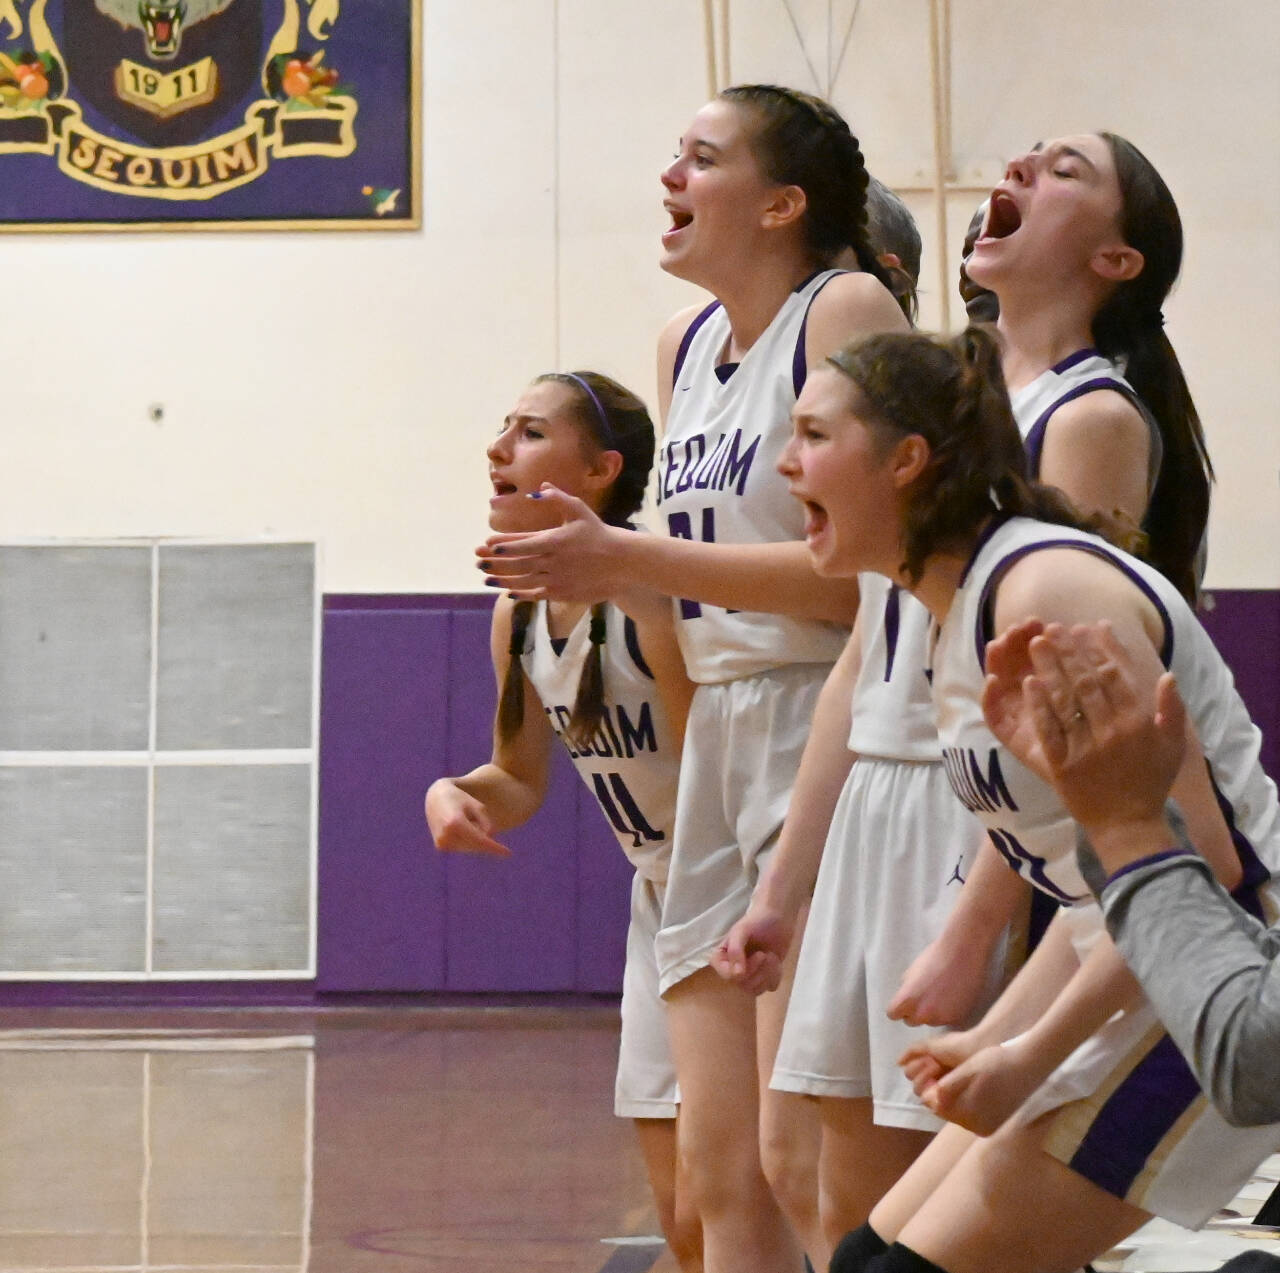 Sequim Gazette photo by Michael Dashiell / Sequim High’s bench erupts after a fourth quarter score in the Wolves’ 38-31 home win over Bainbridge on Jan. 12. Pictured are, from left, are Taryn Johnson, Dani Hermann, Taylor Heyting and Libby Turella.